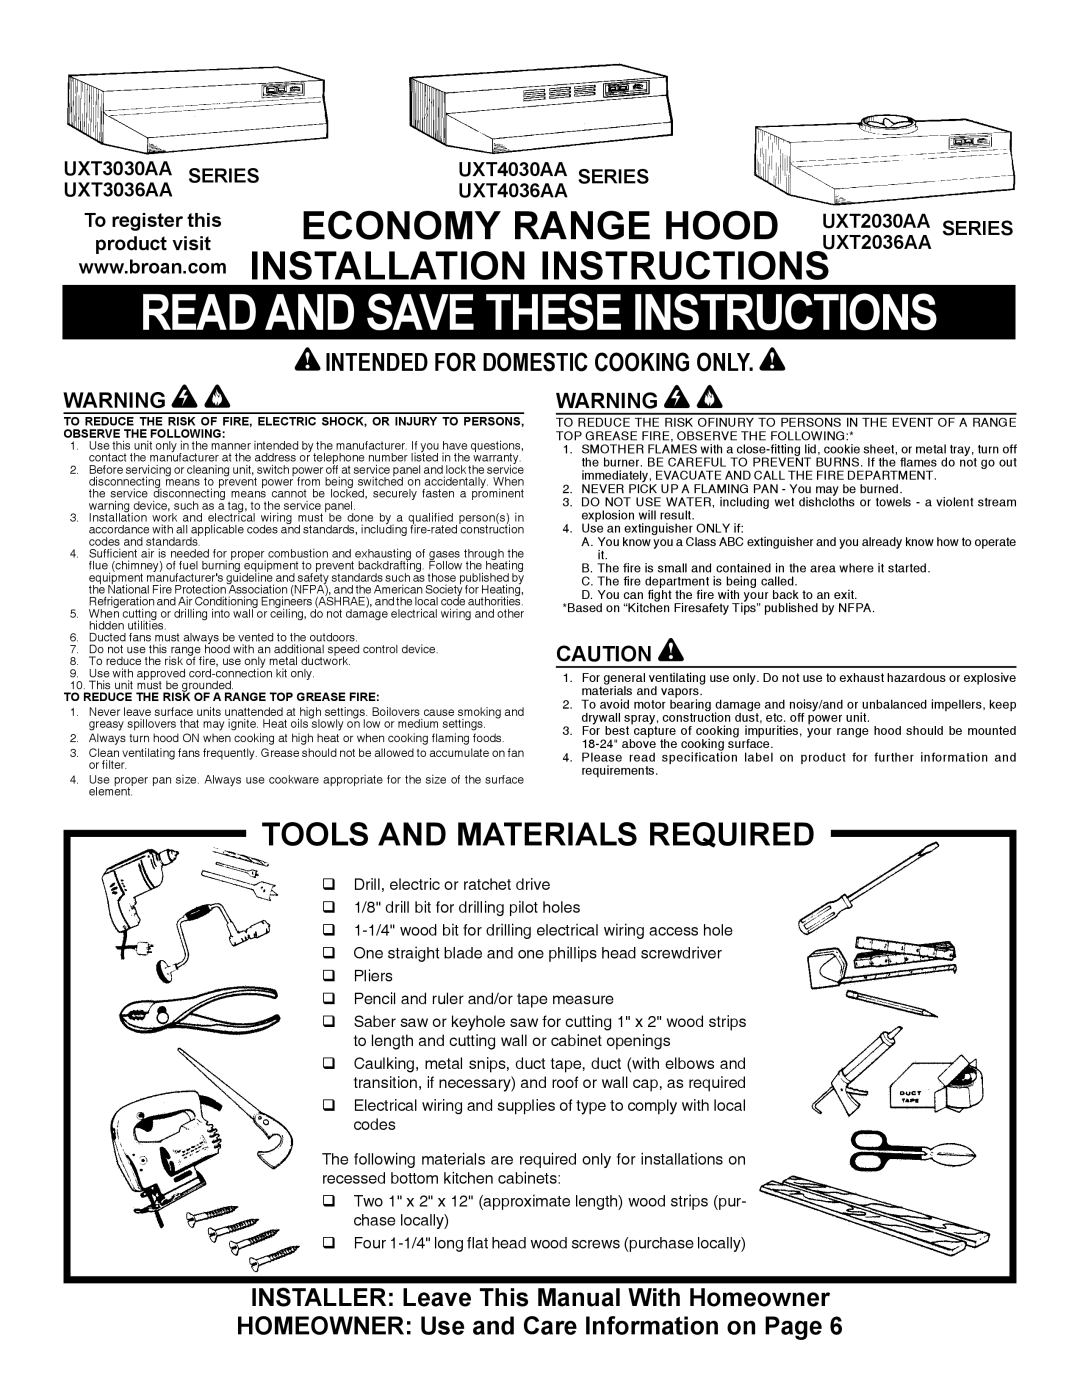 Maytag UXT4030AA installation instructions product visit, To register this, Read And Save These Instructions, Series 